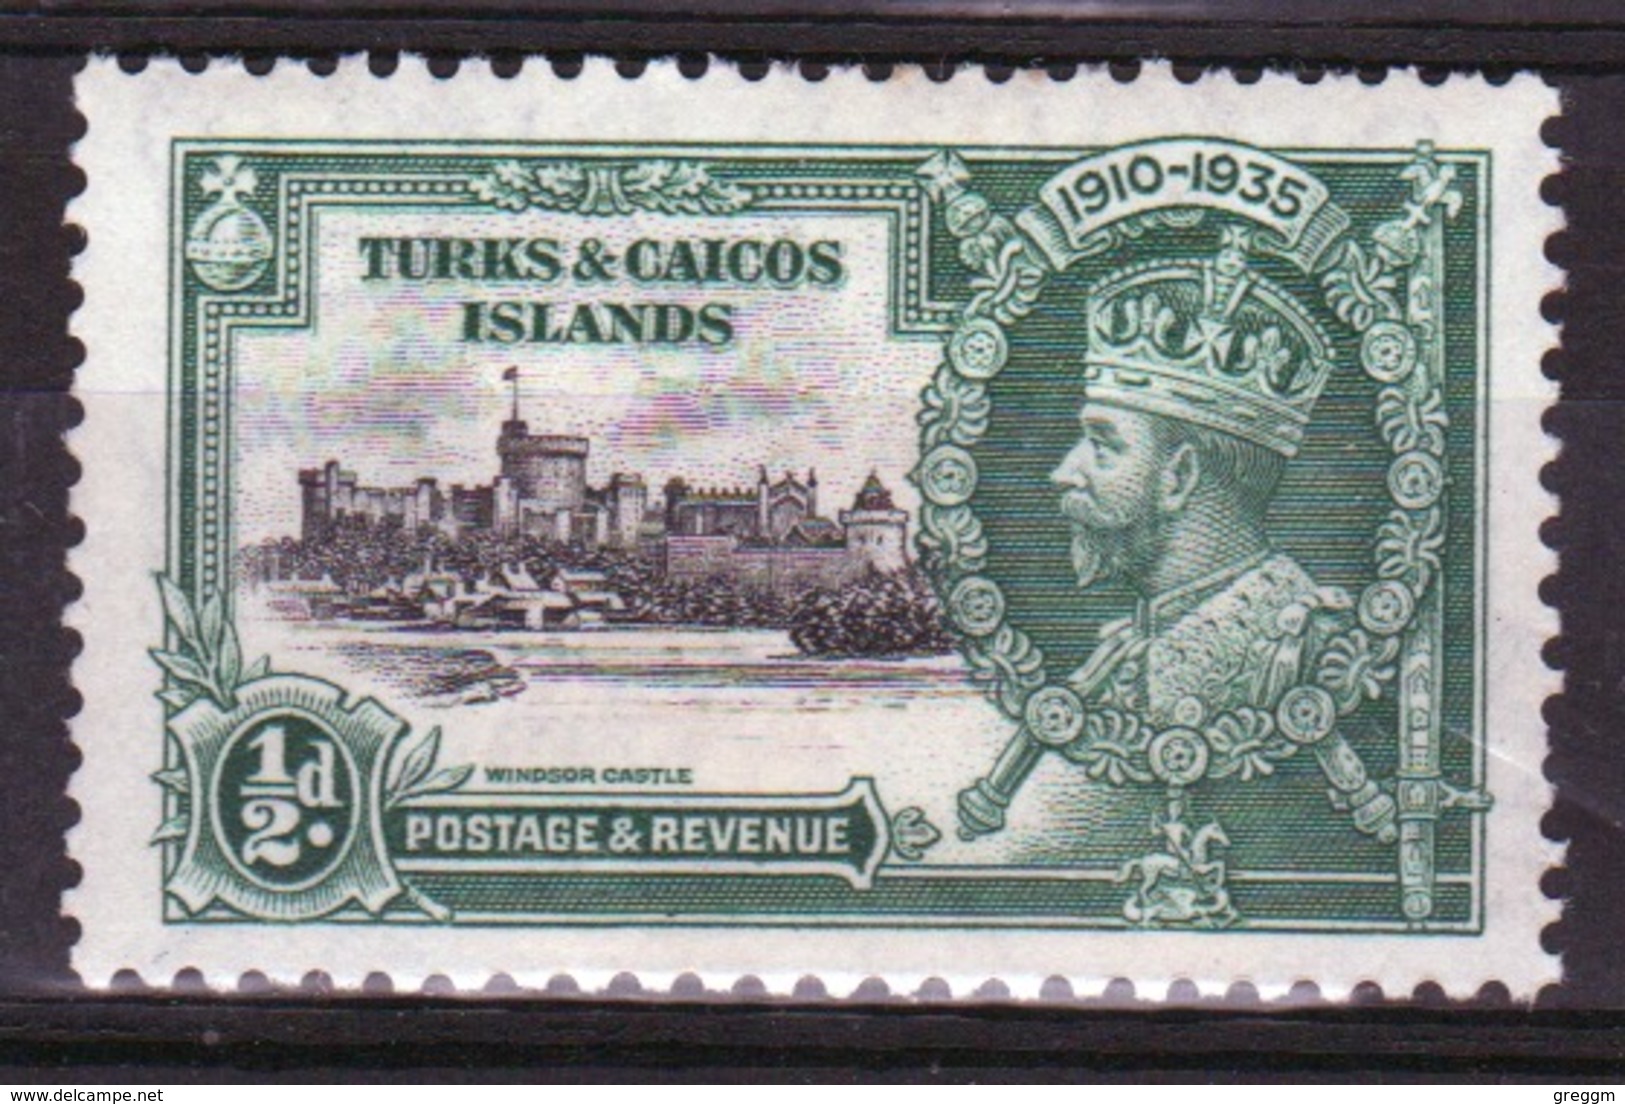 Turks And Caicos Half Penny Single Stamp From The 1935 Silver Jubilee Set. - Turks And Caicos